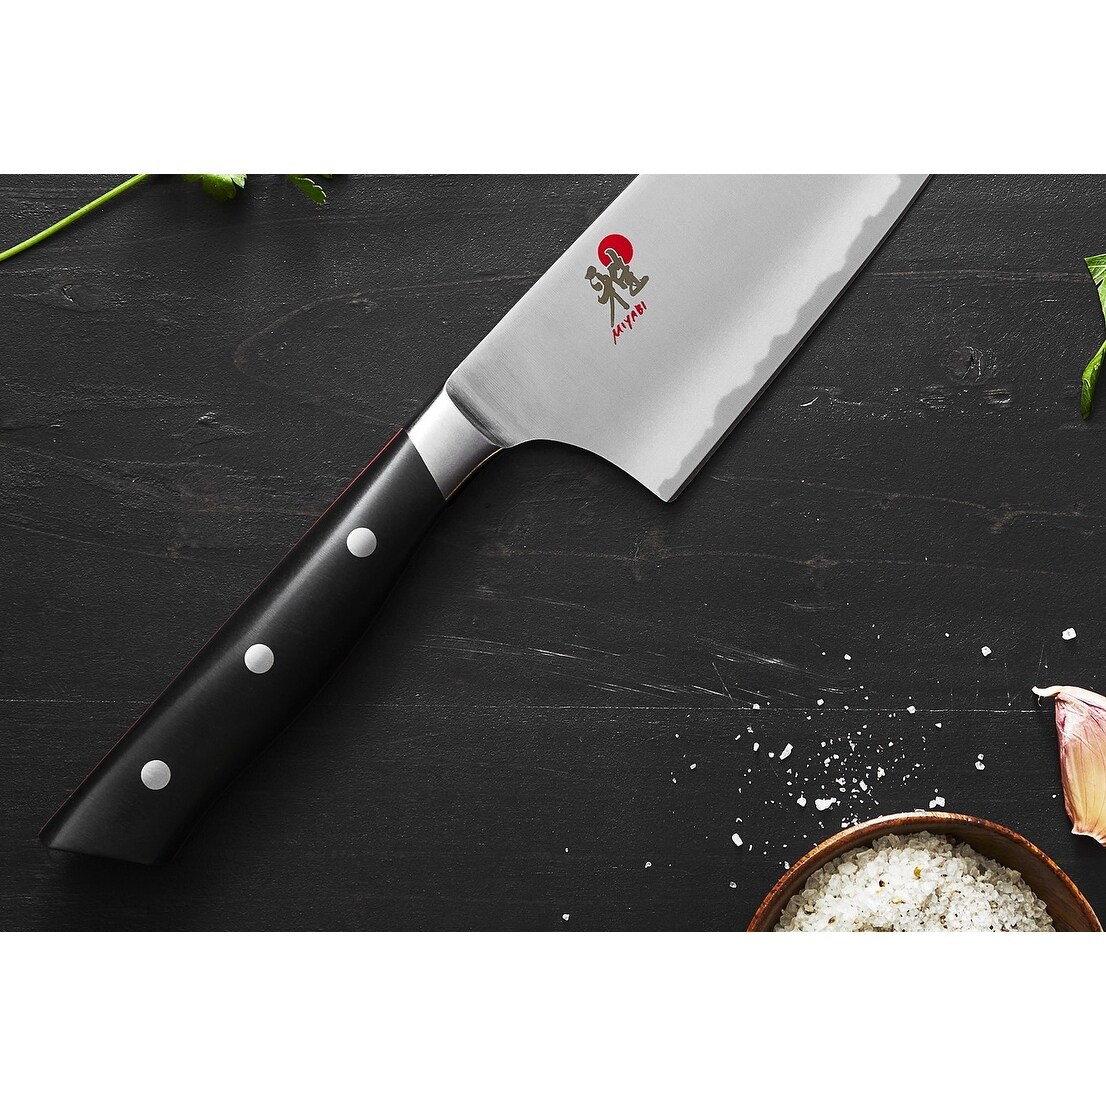 https://ak1.ostkcdn.com/images/products/is/images/direct/a5aa61aed48b53546f93e01da496ae23307863e0/Miyabi-Evolution-9.5-inch-Slicing-Knife.jpg